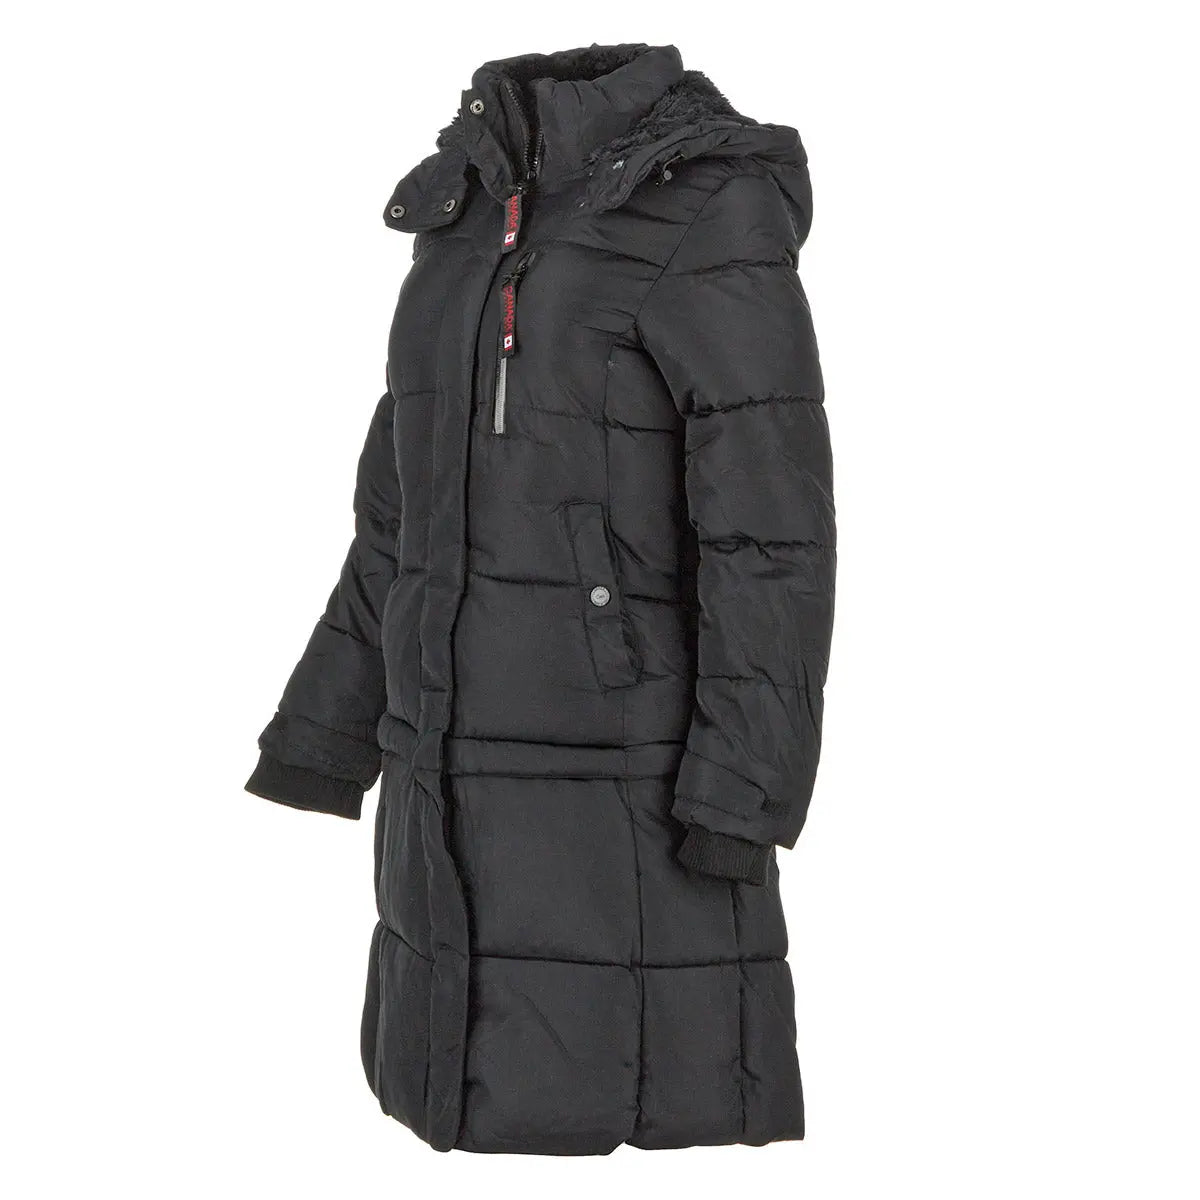 canada weather gear Long Cold Weather Parka Coat in Black